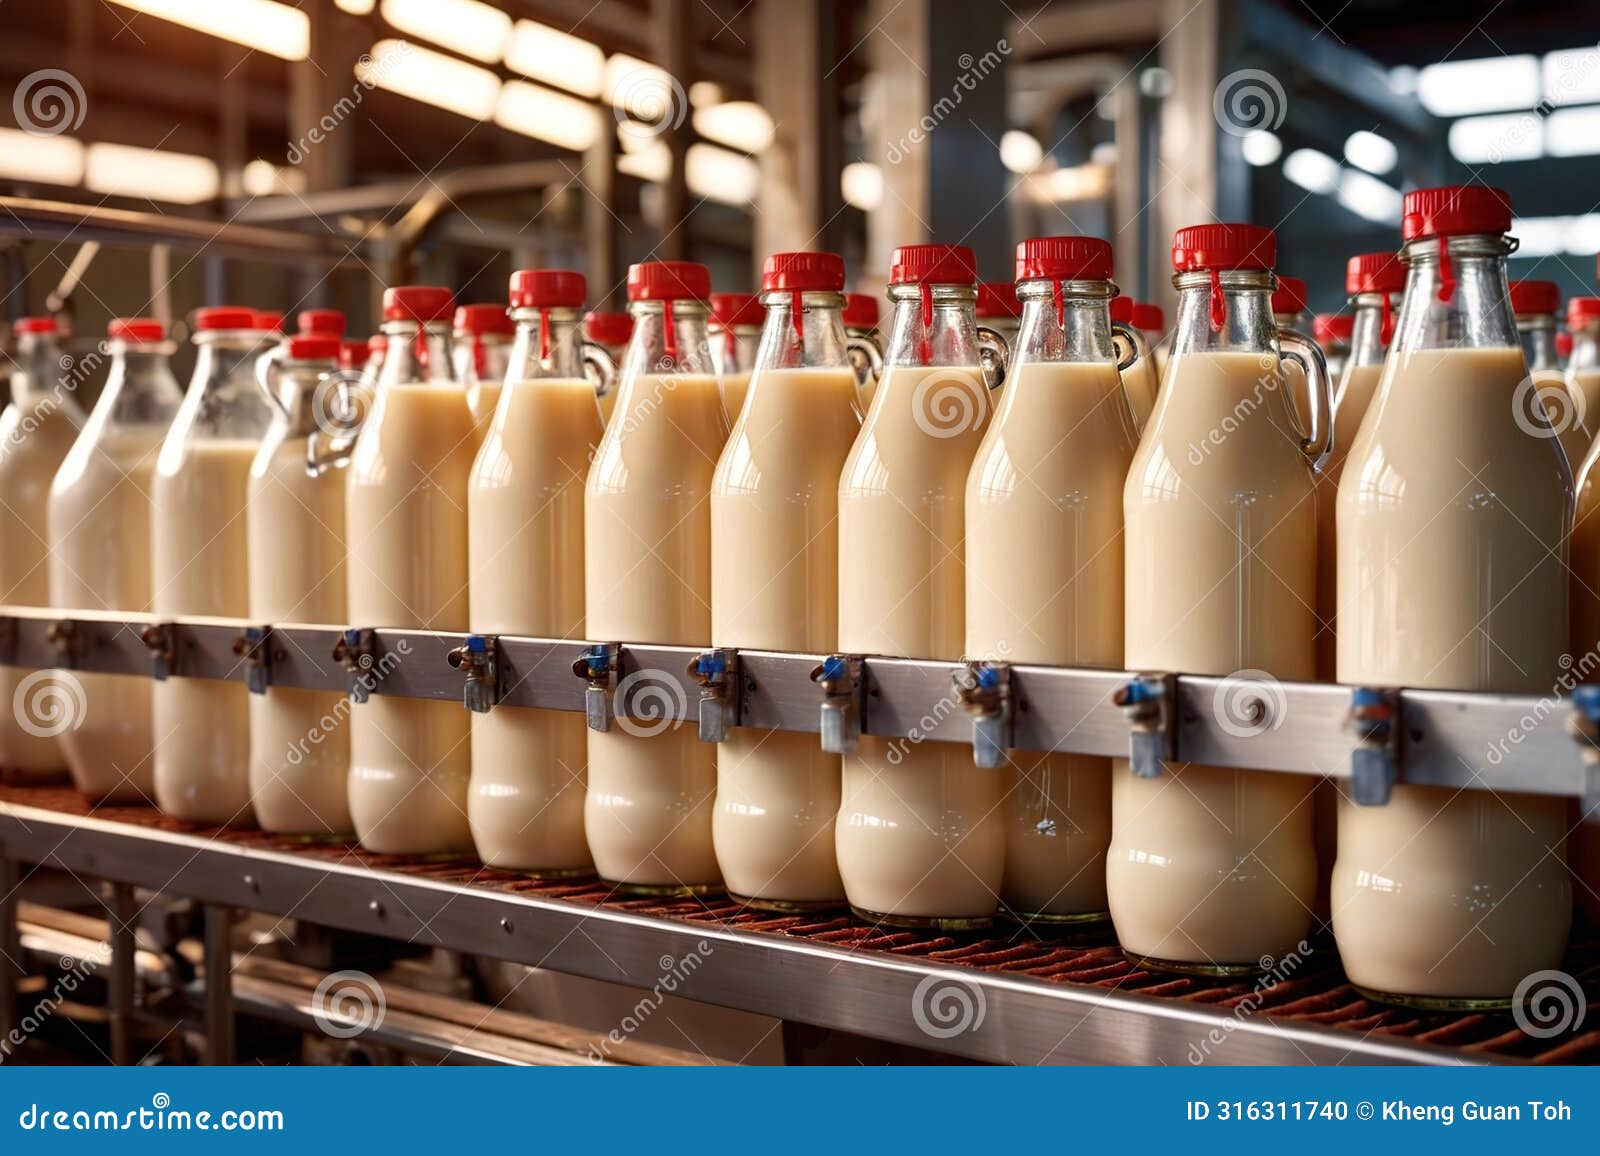 Milk Bottling Line at Dairy Processing Manufacturing Factory Plant ...